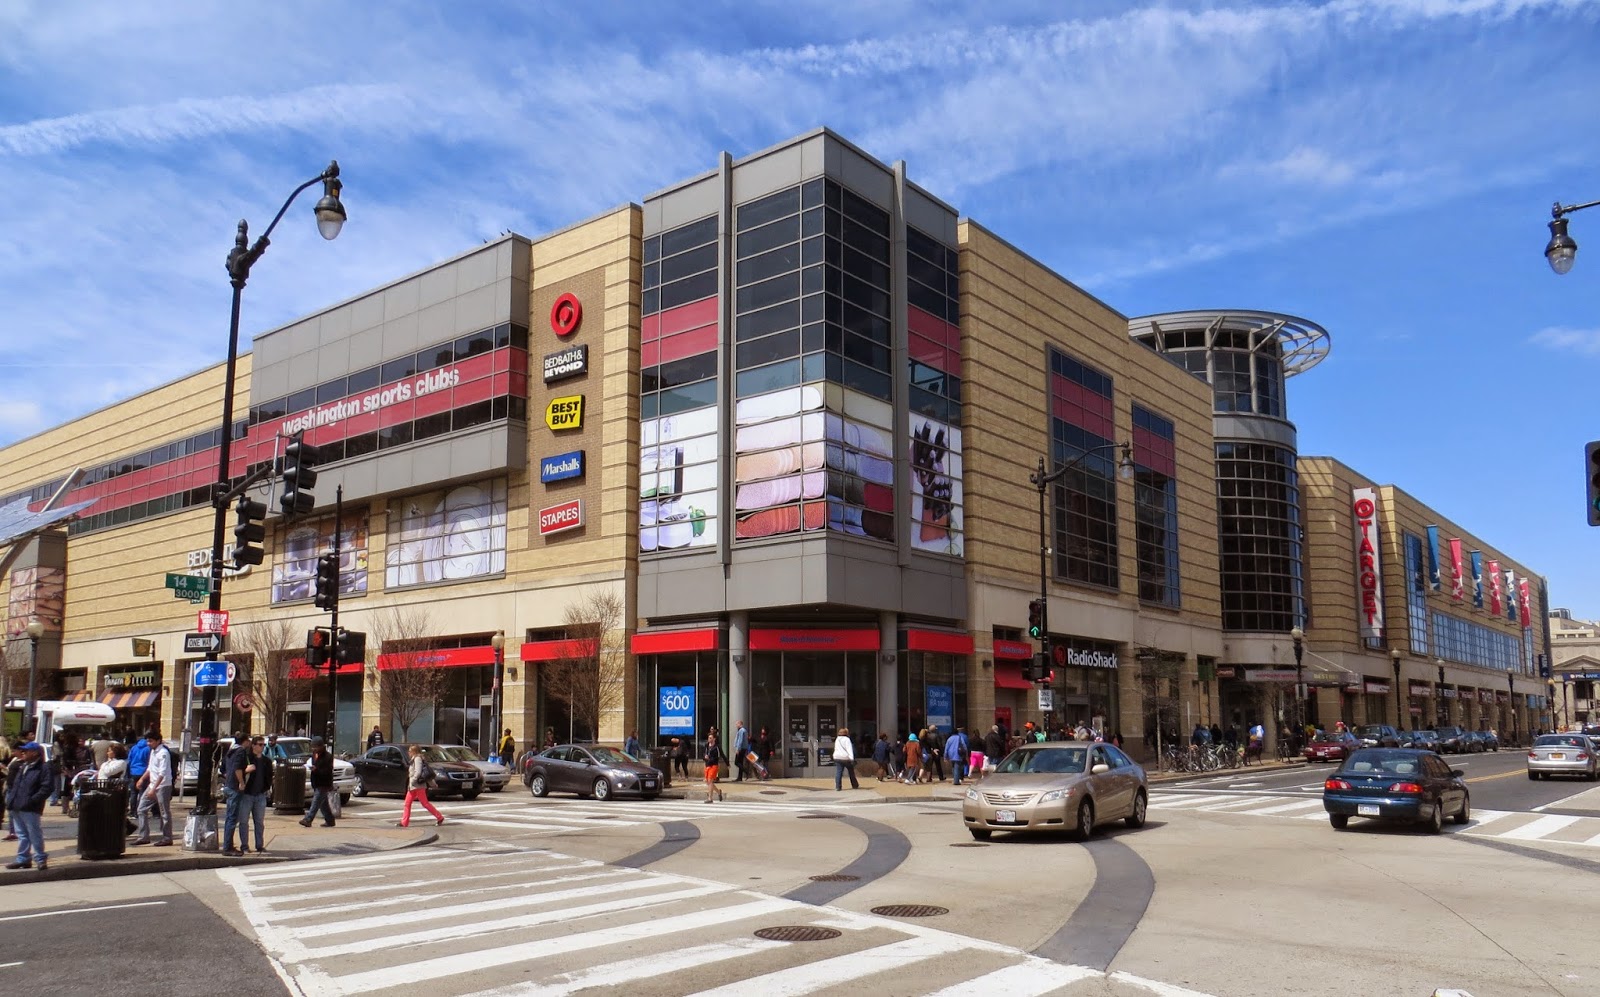 DC USA in Columbia Heights is a three-story shopping center across from a metro station. (Photo: Streets of Washington)